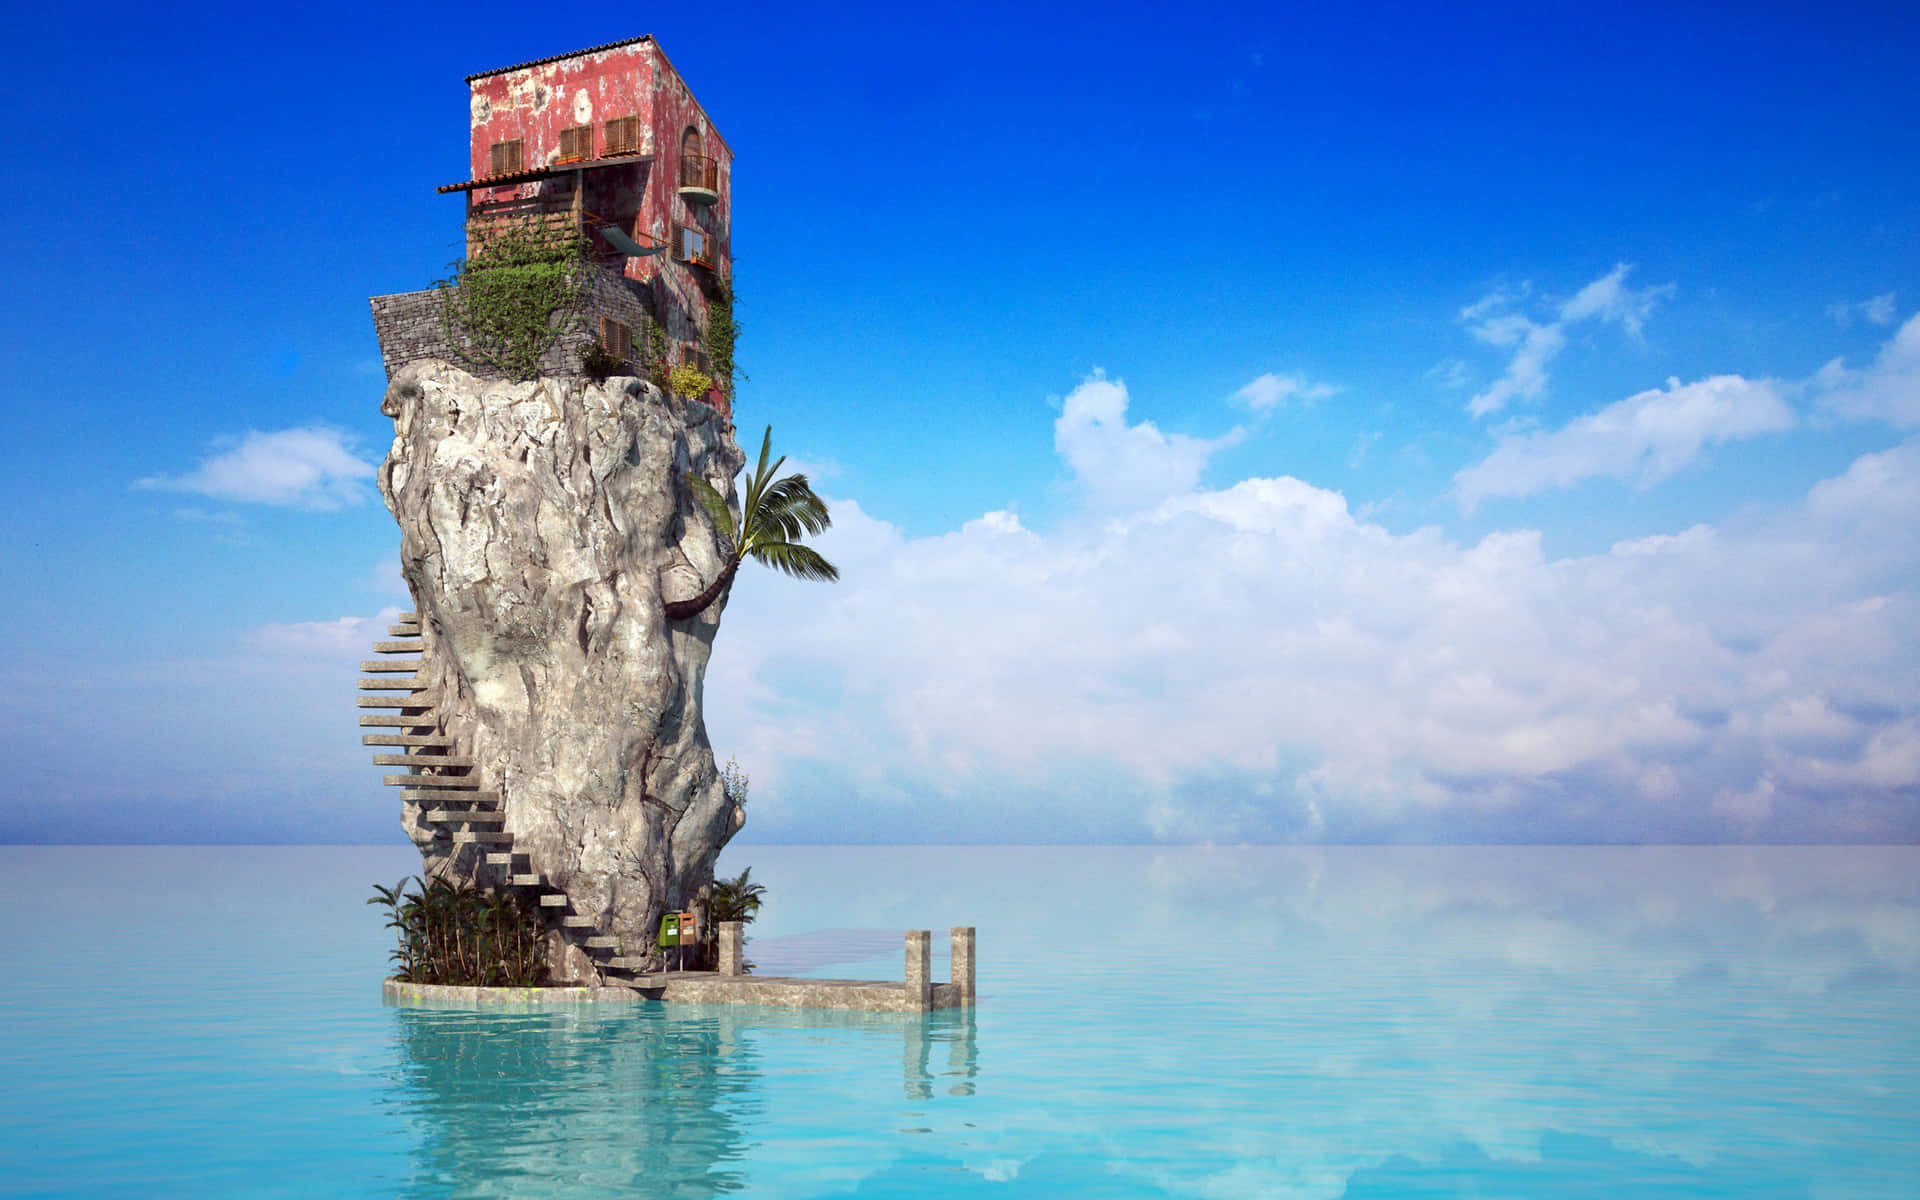 A House On A Rock In The Water